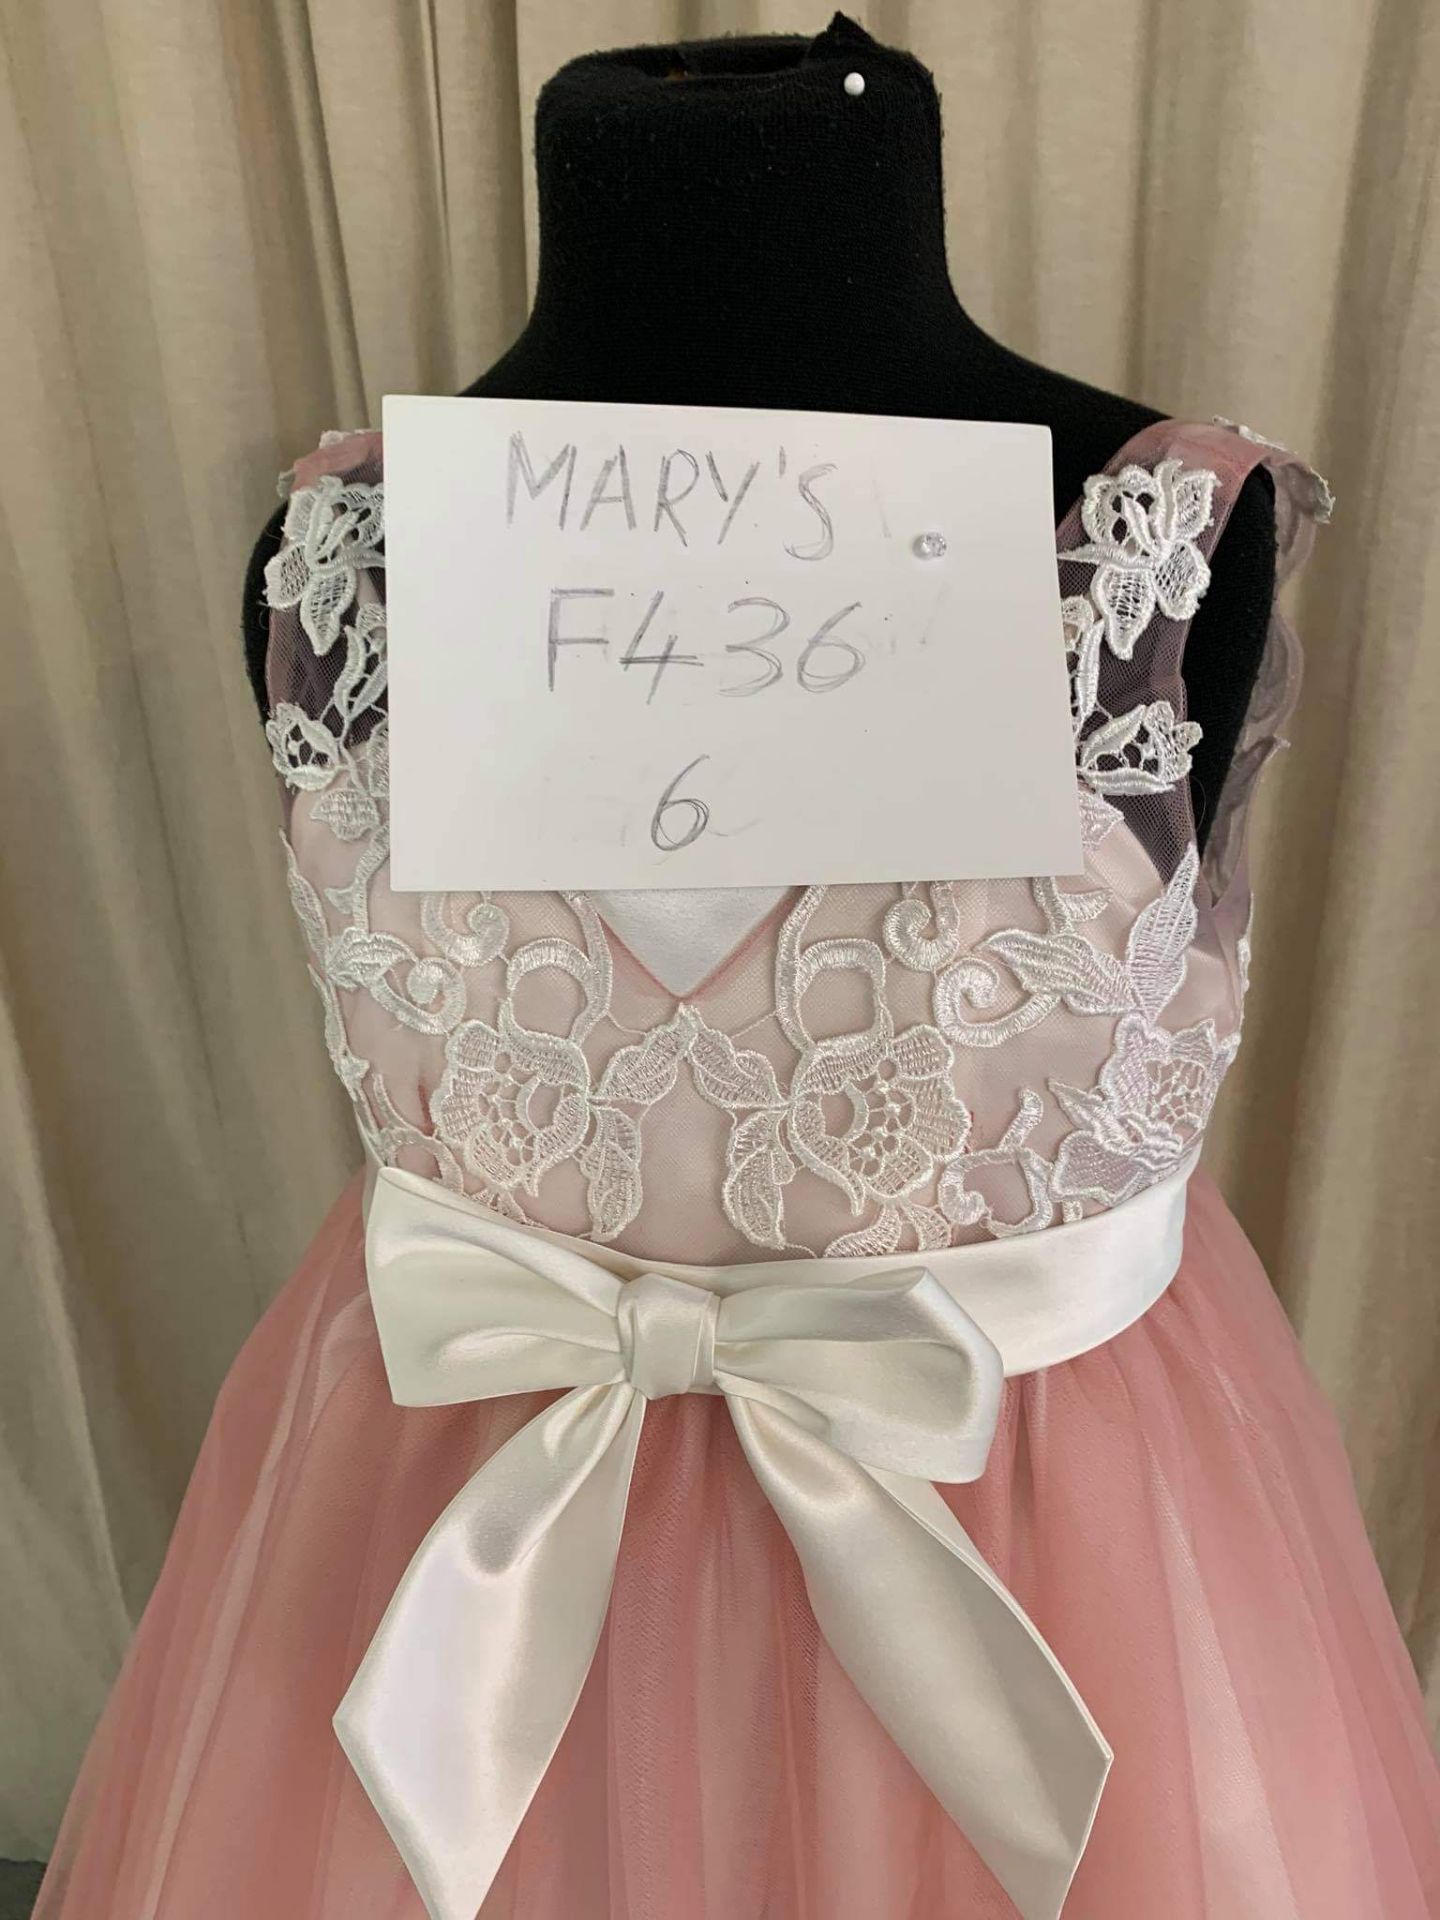 Mary's Angels Flowergirl Or Communion Dress Age 4 To 6 - Image 2 of 4